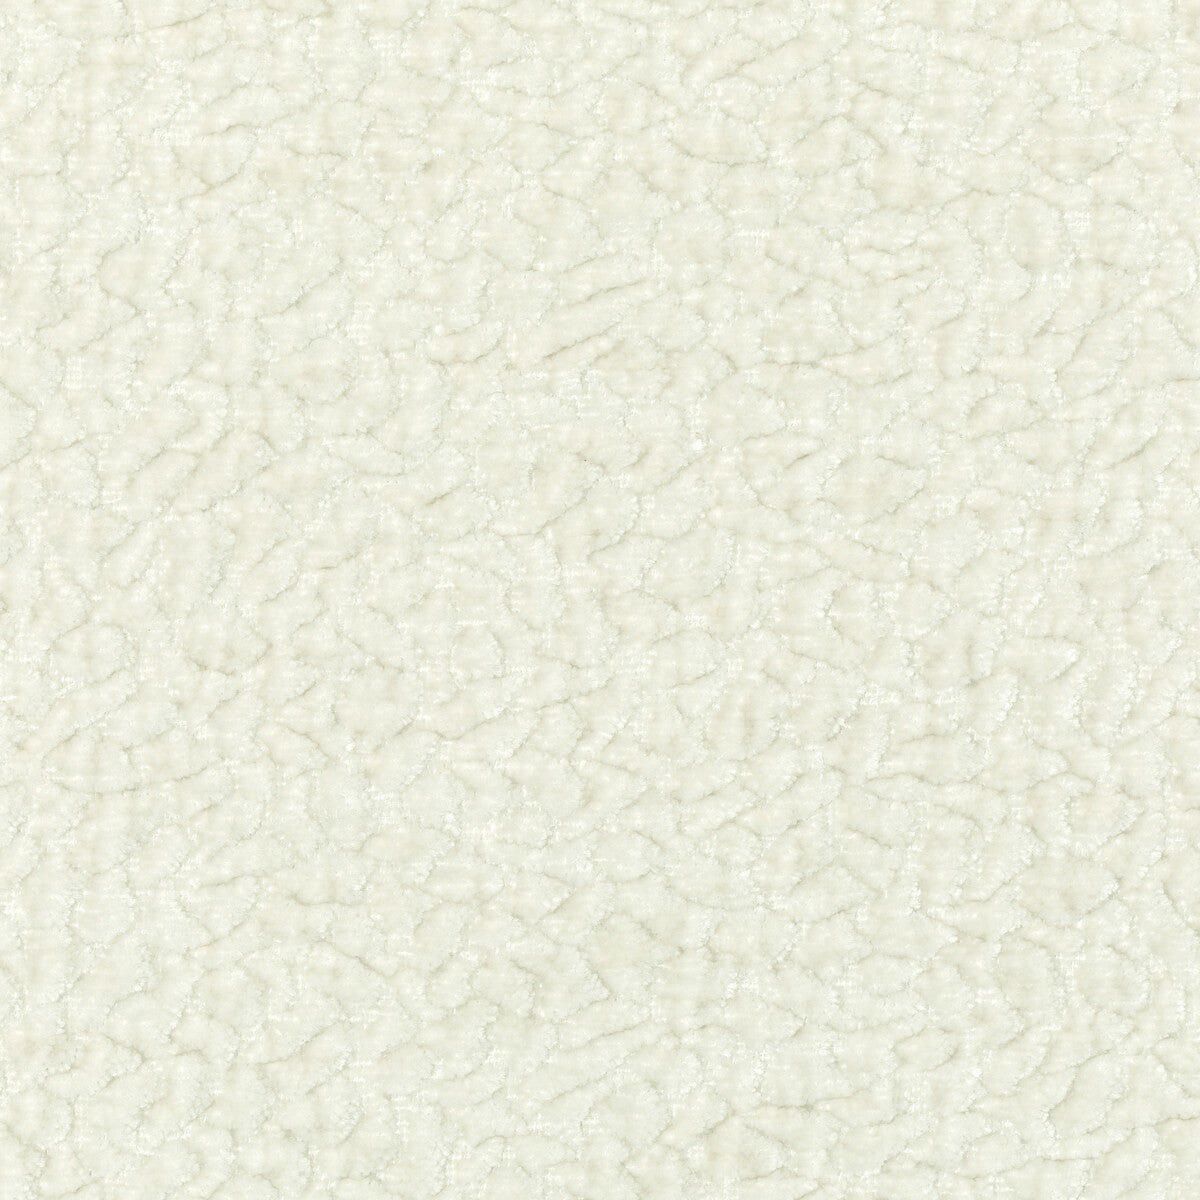 Kravet Couture fabric in 36596-101 color - pattern 36596.101.0 - by Kravet Couture in the Mabley Handler collection